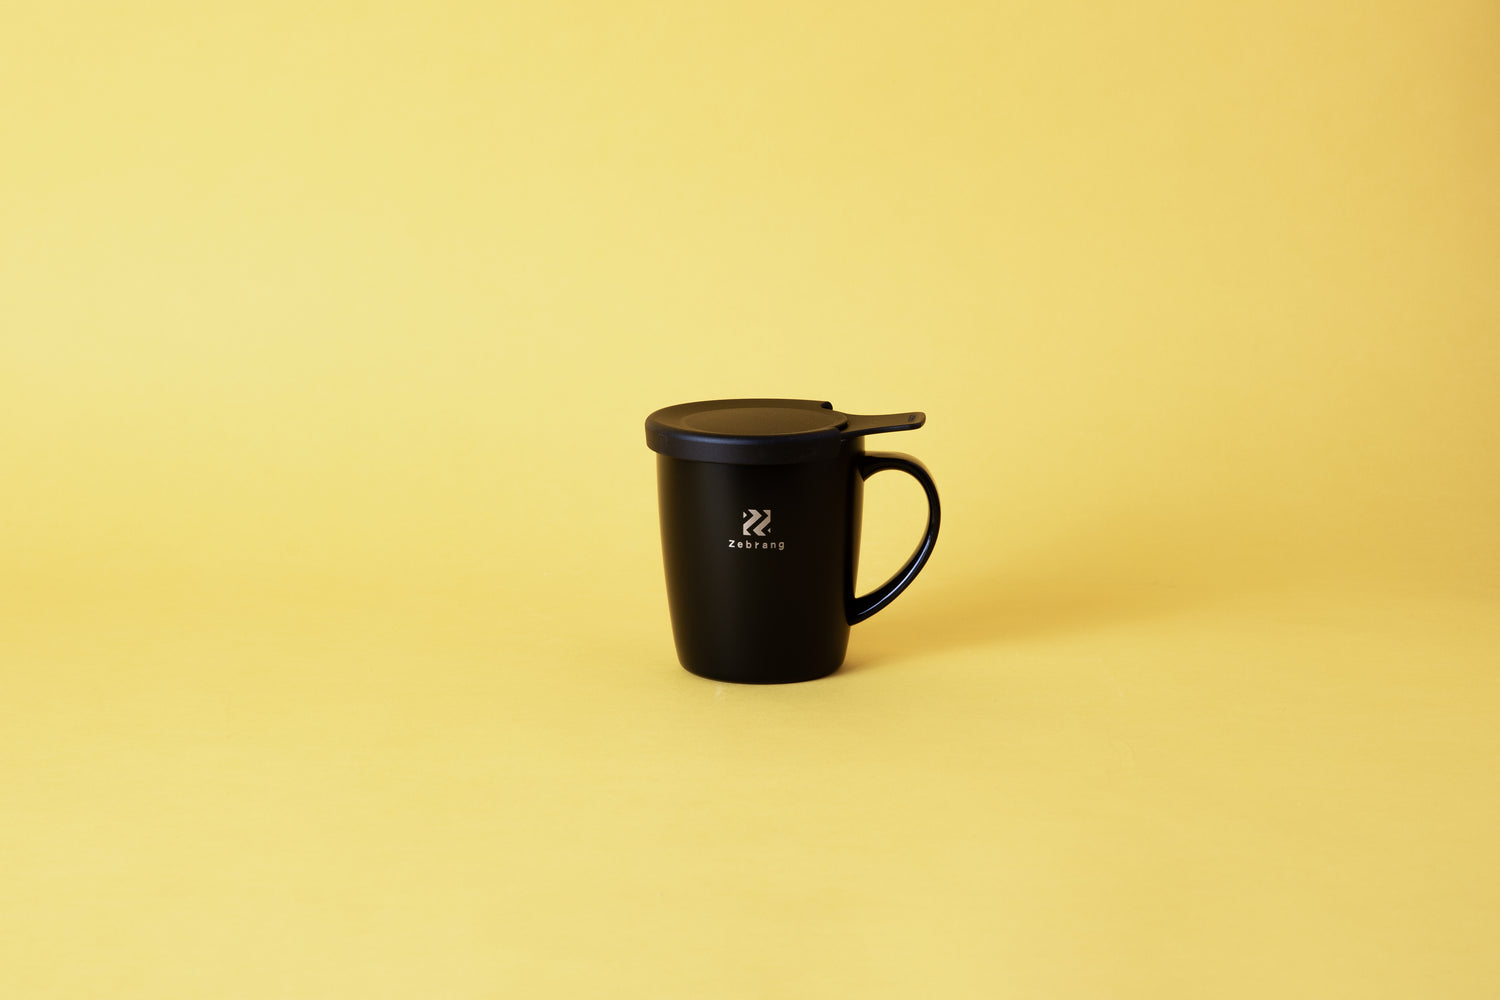 a black mug with a black lid and handle. set on yellow background